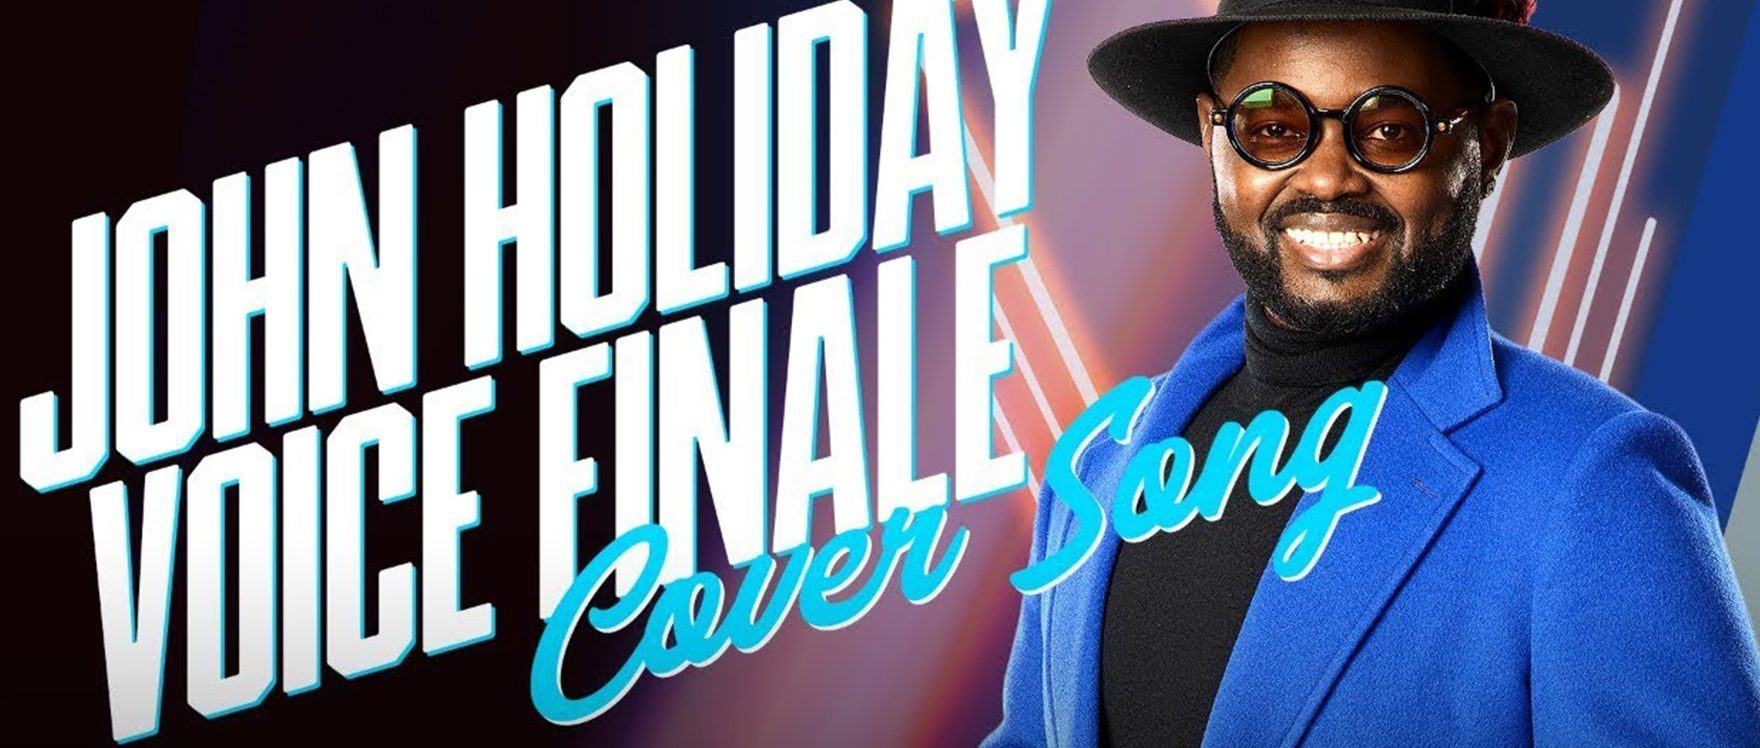 John Holiday Voice Finale